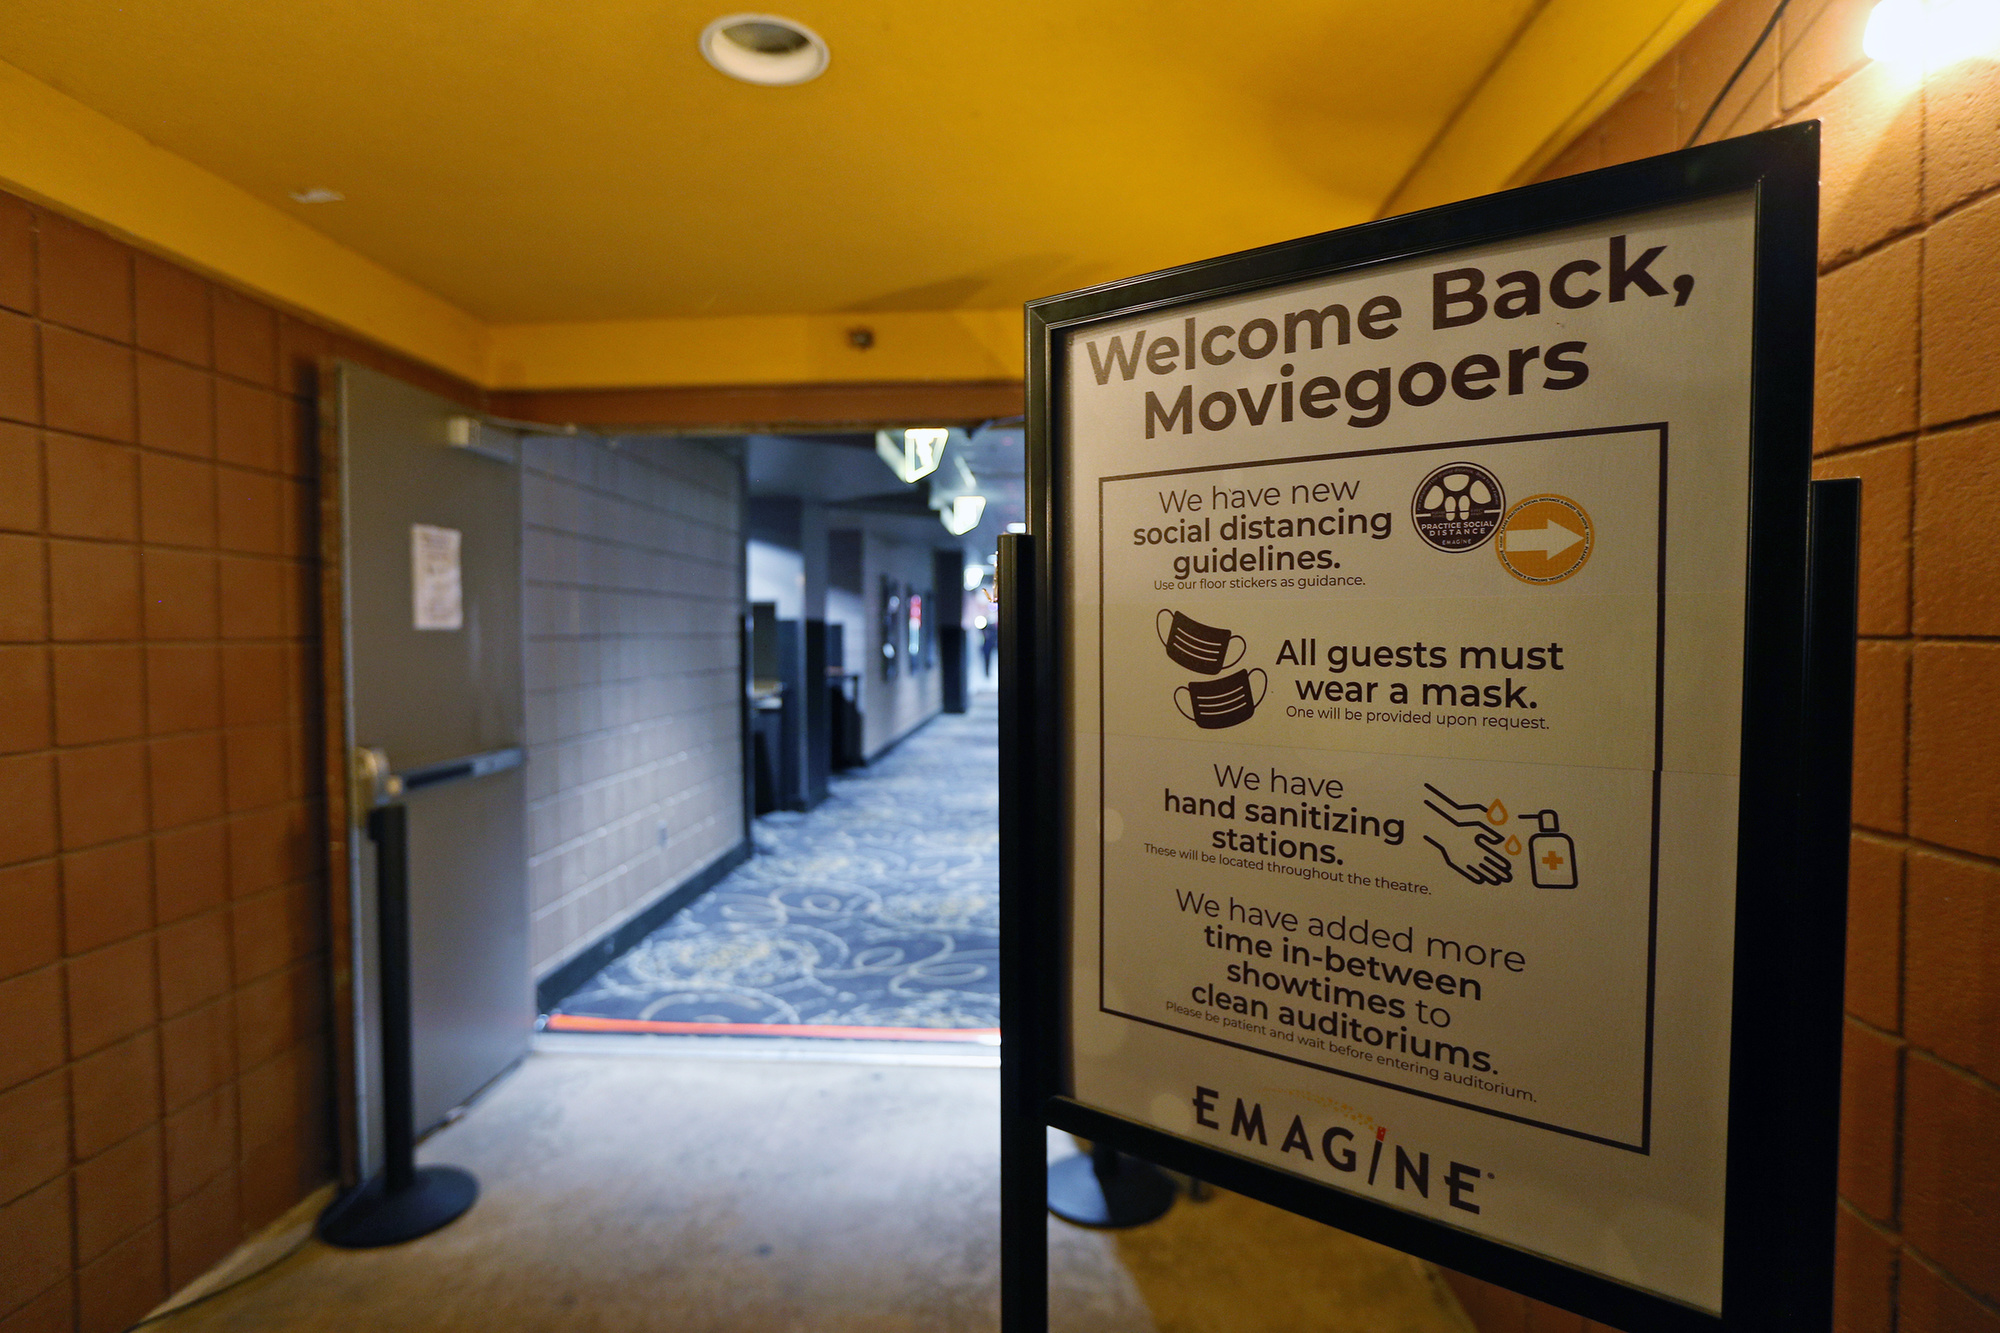 Bowling alleys, movie theaters, concert halls and theaters struggle